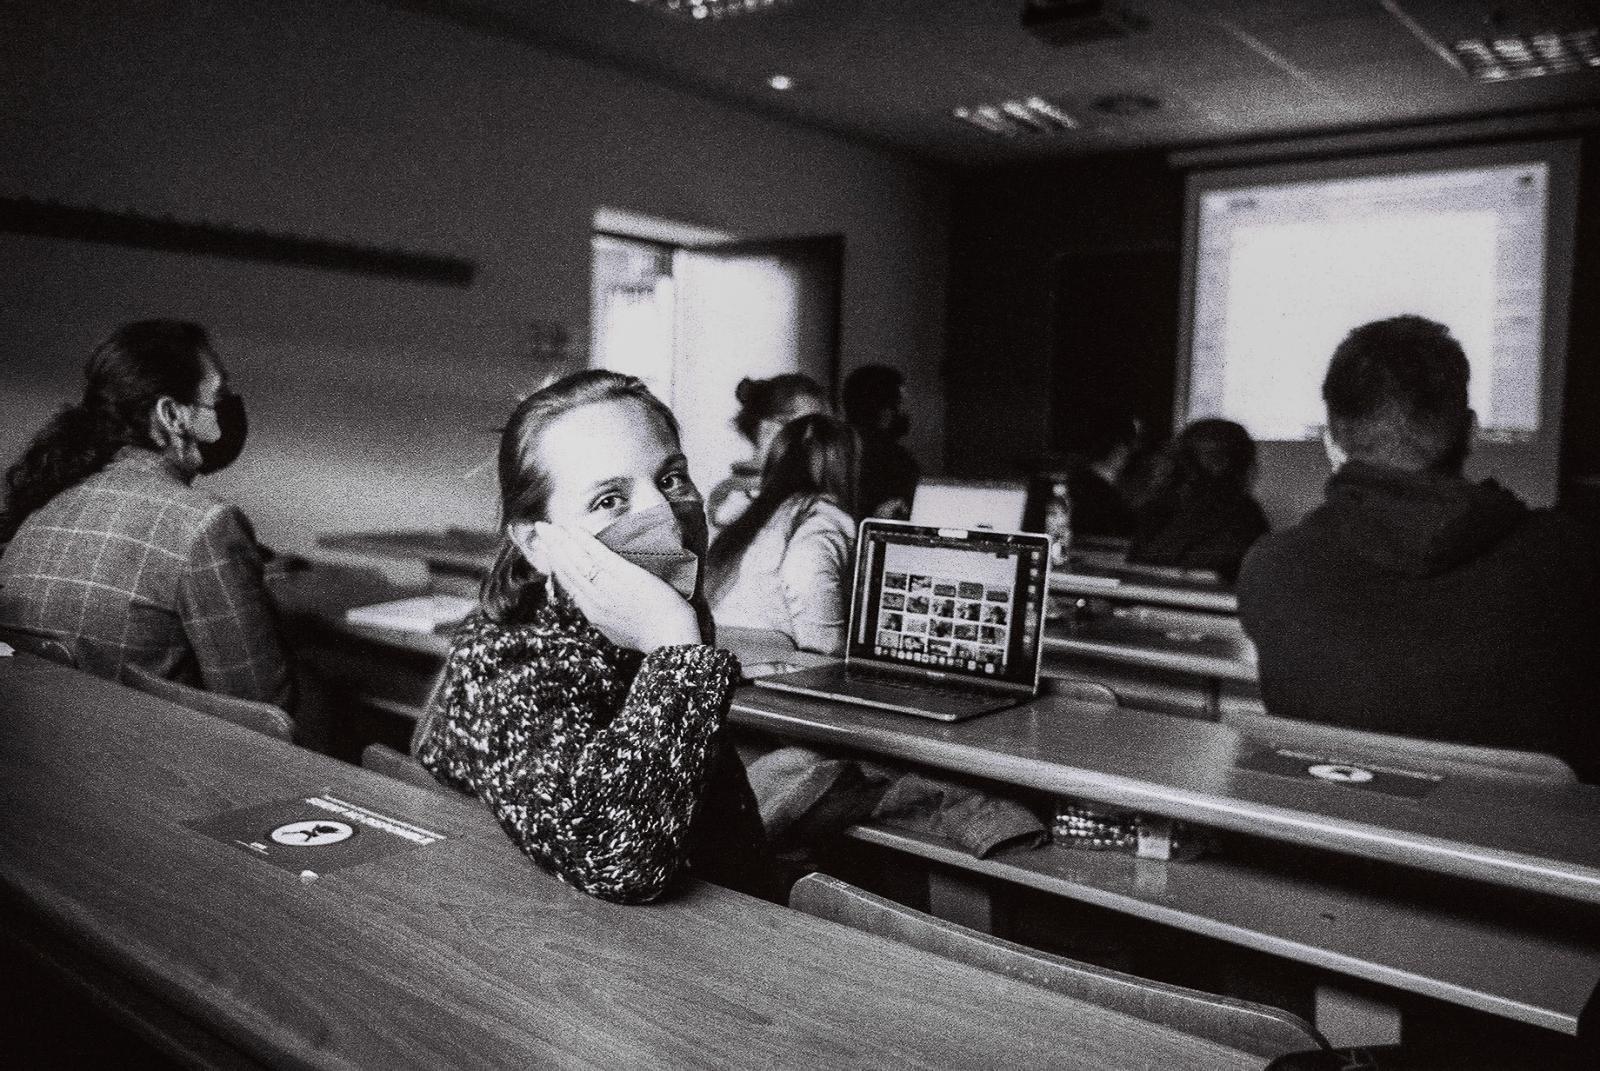 Class with HP5 Plus 400